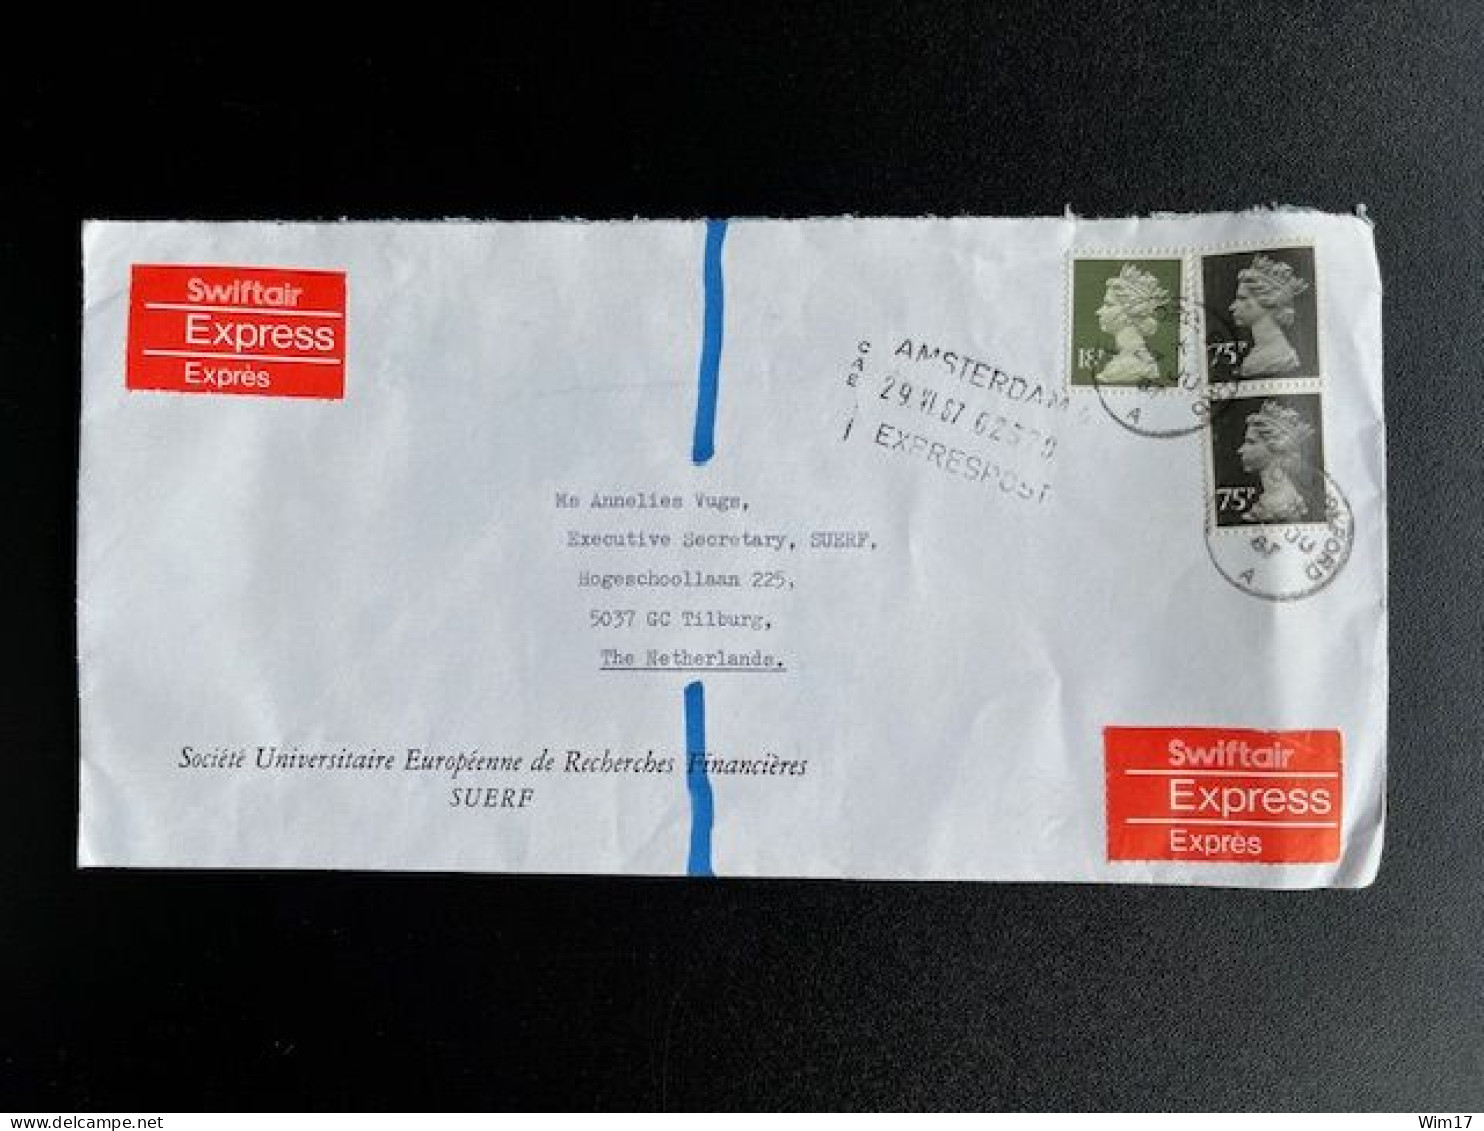 GREAT BRITAIN 1987 EXPRESS LETTER OXFORD TO TILBURG 27-06-1987 GROOT BRITTANNIE EXPRES - Covers & Documents